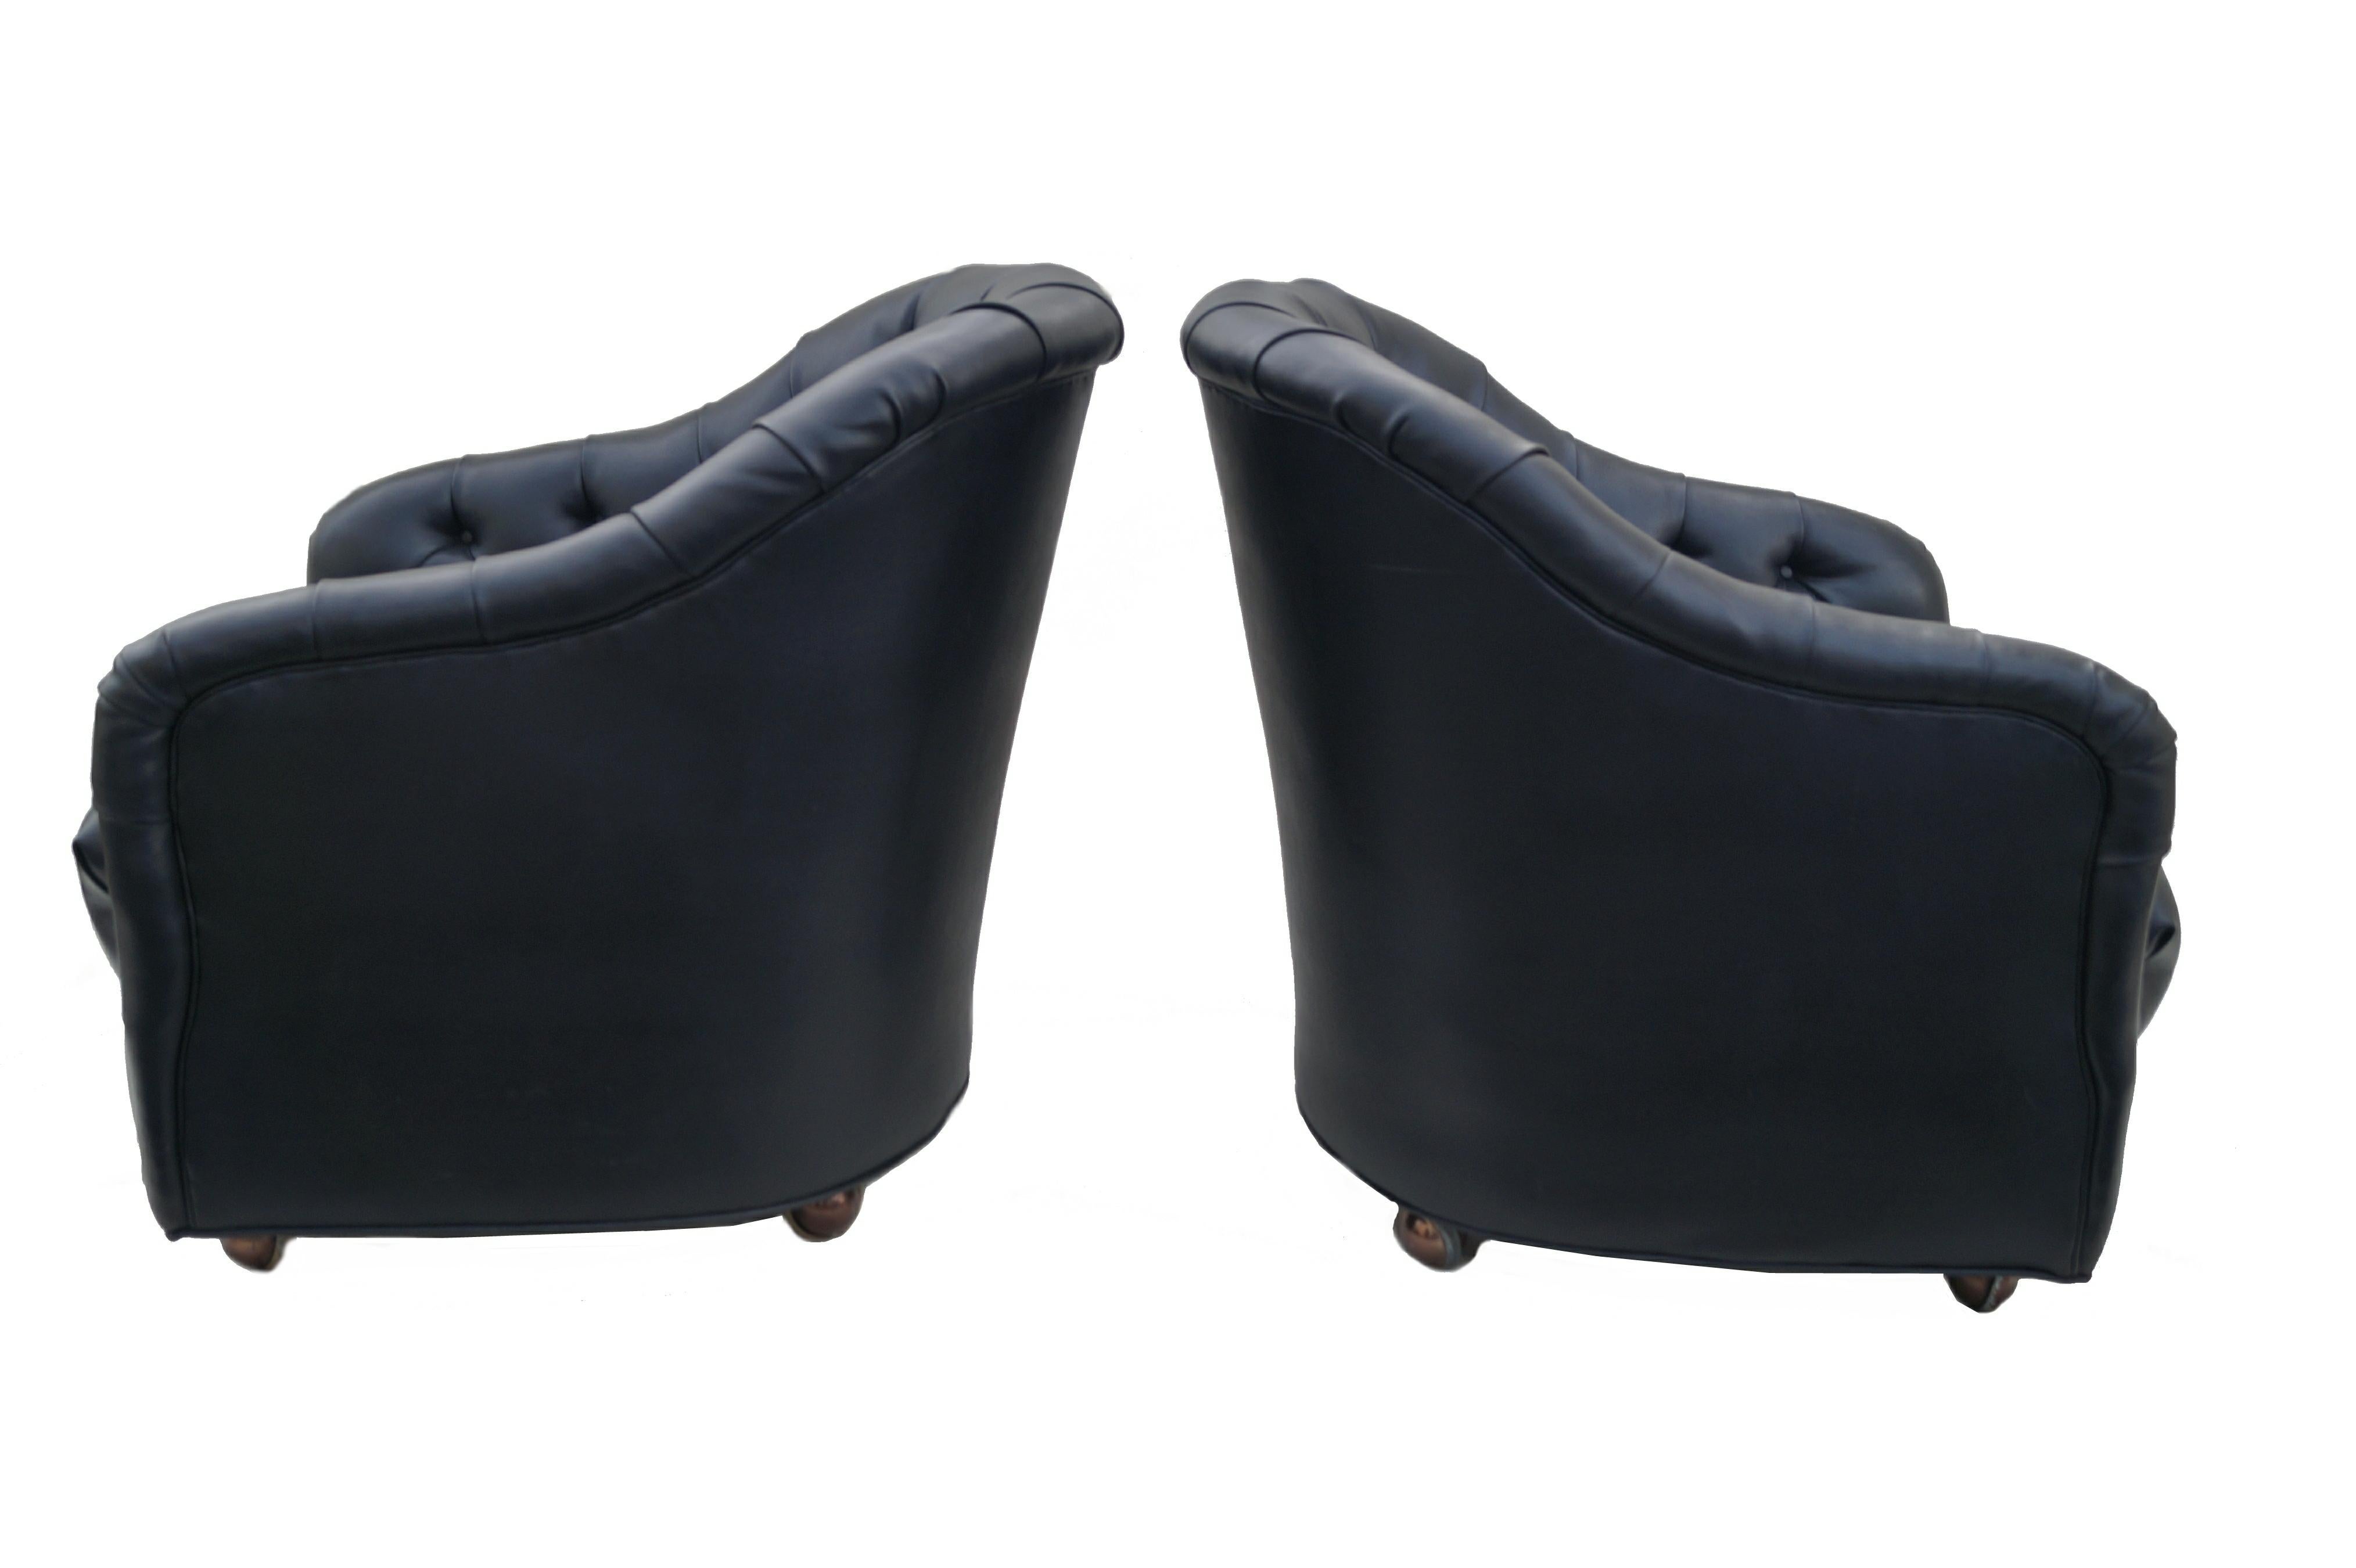 Upholstery Pair of Black Mid-Century Modern Ward Bennett Style Tufted Lounge Chairs Casters